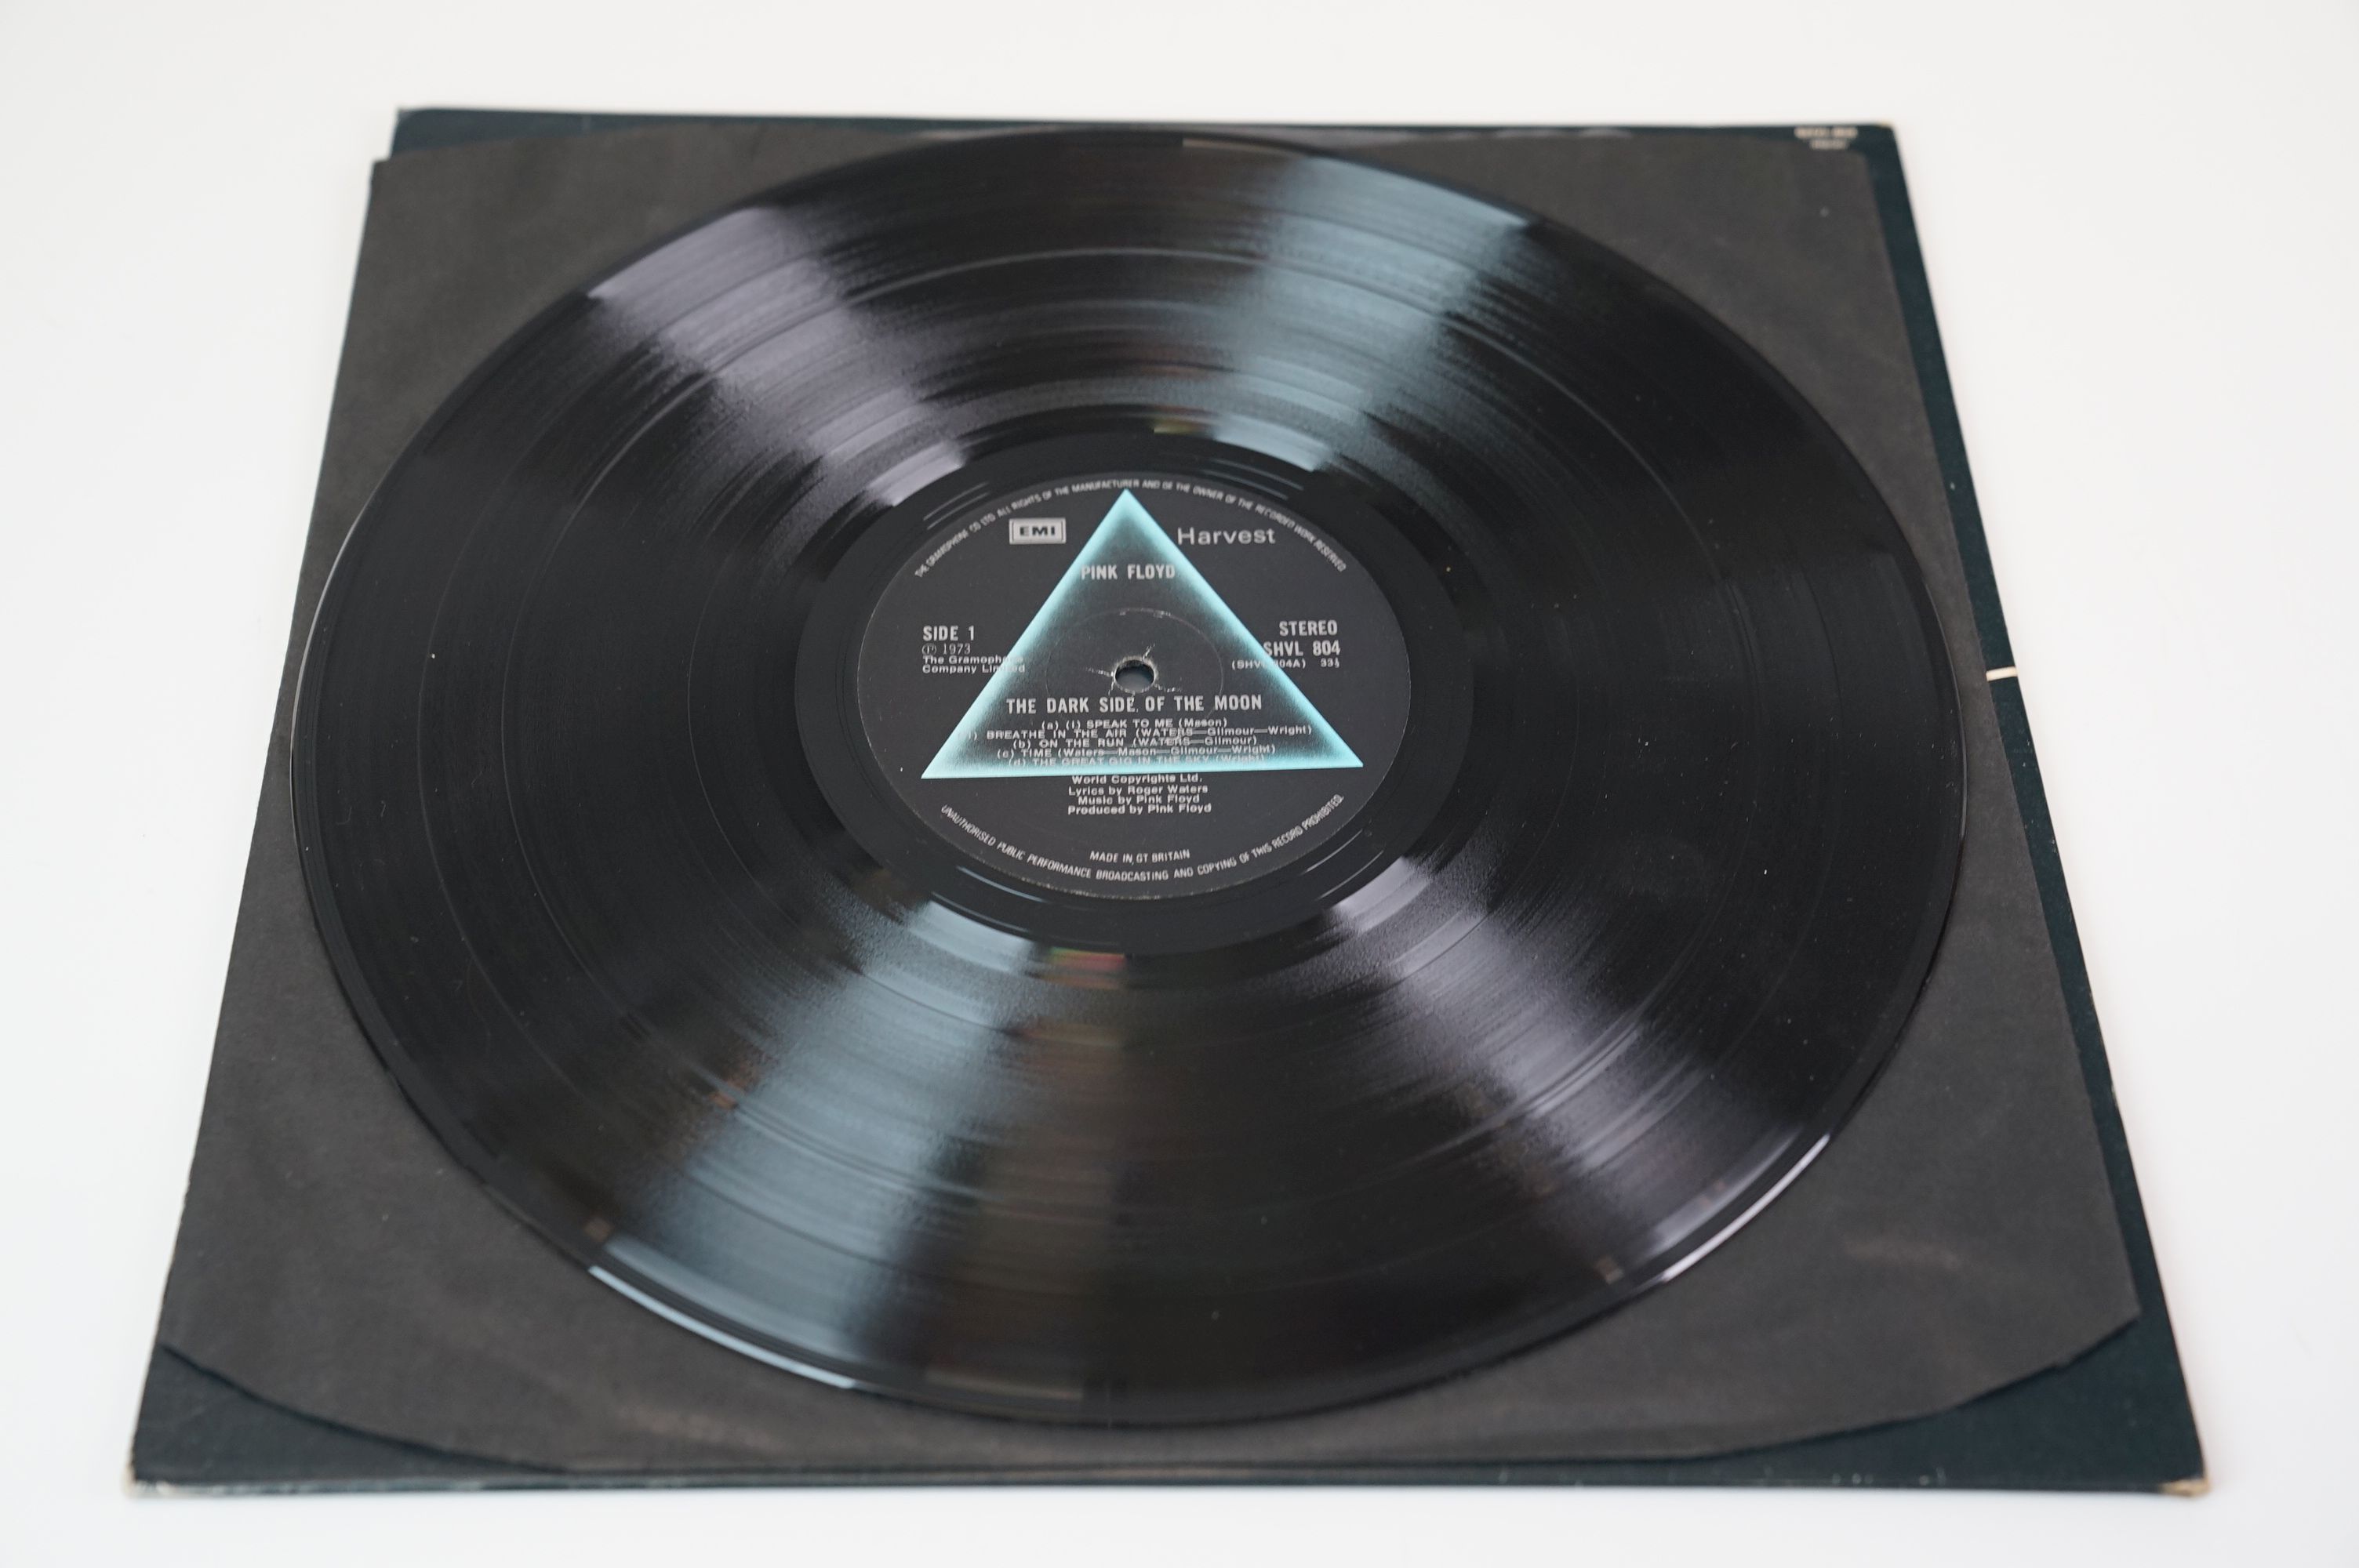 Vinyl - Four Pink Floyd LPs to include Dark Side of The Moon on Harvest SHVL804 stereo, Meddle on - Image 8 of 32